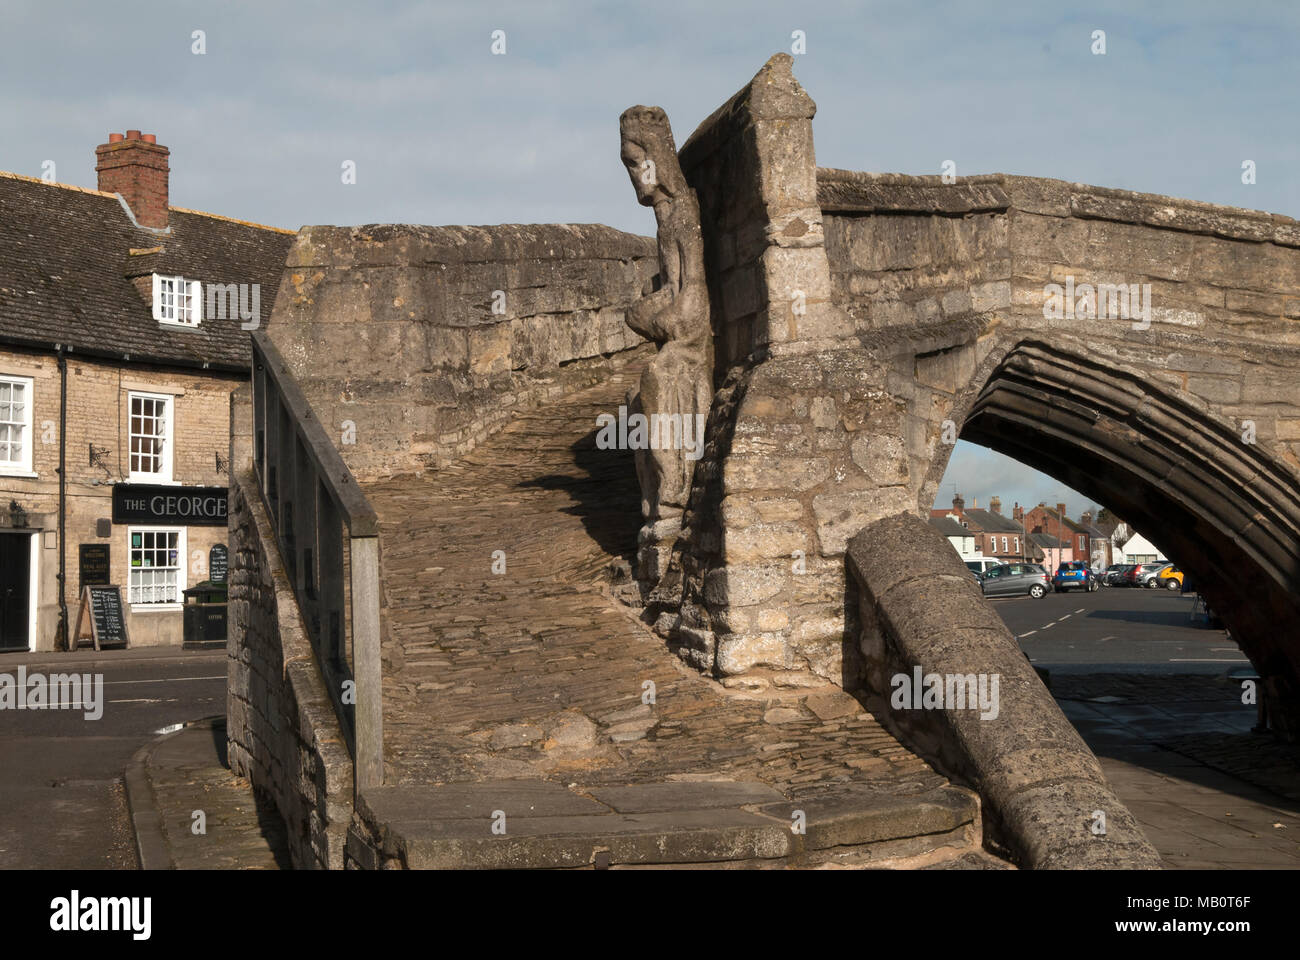 Crowland Trinity Bridge, Lincolnshire. Medieval sculpture of King Ethelbald or Aethelbald King of Mercia. Originally on the Abbey but fell off a long time ago and repositioned on the famous bridge. HOMER SYKES Stock Photo